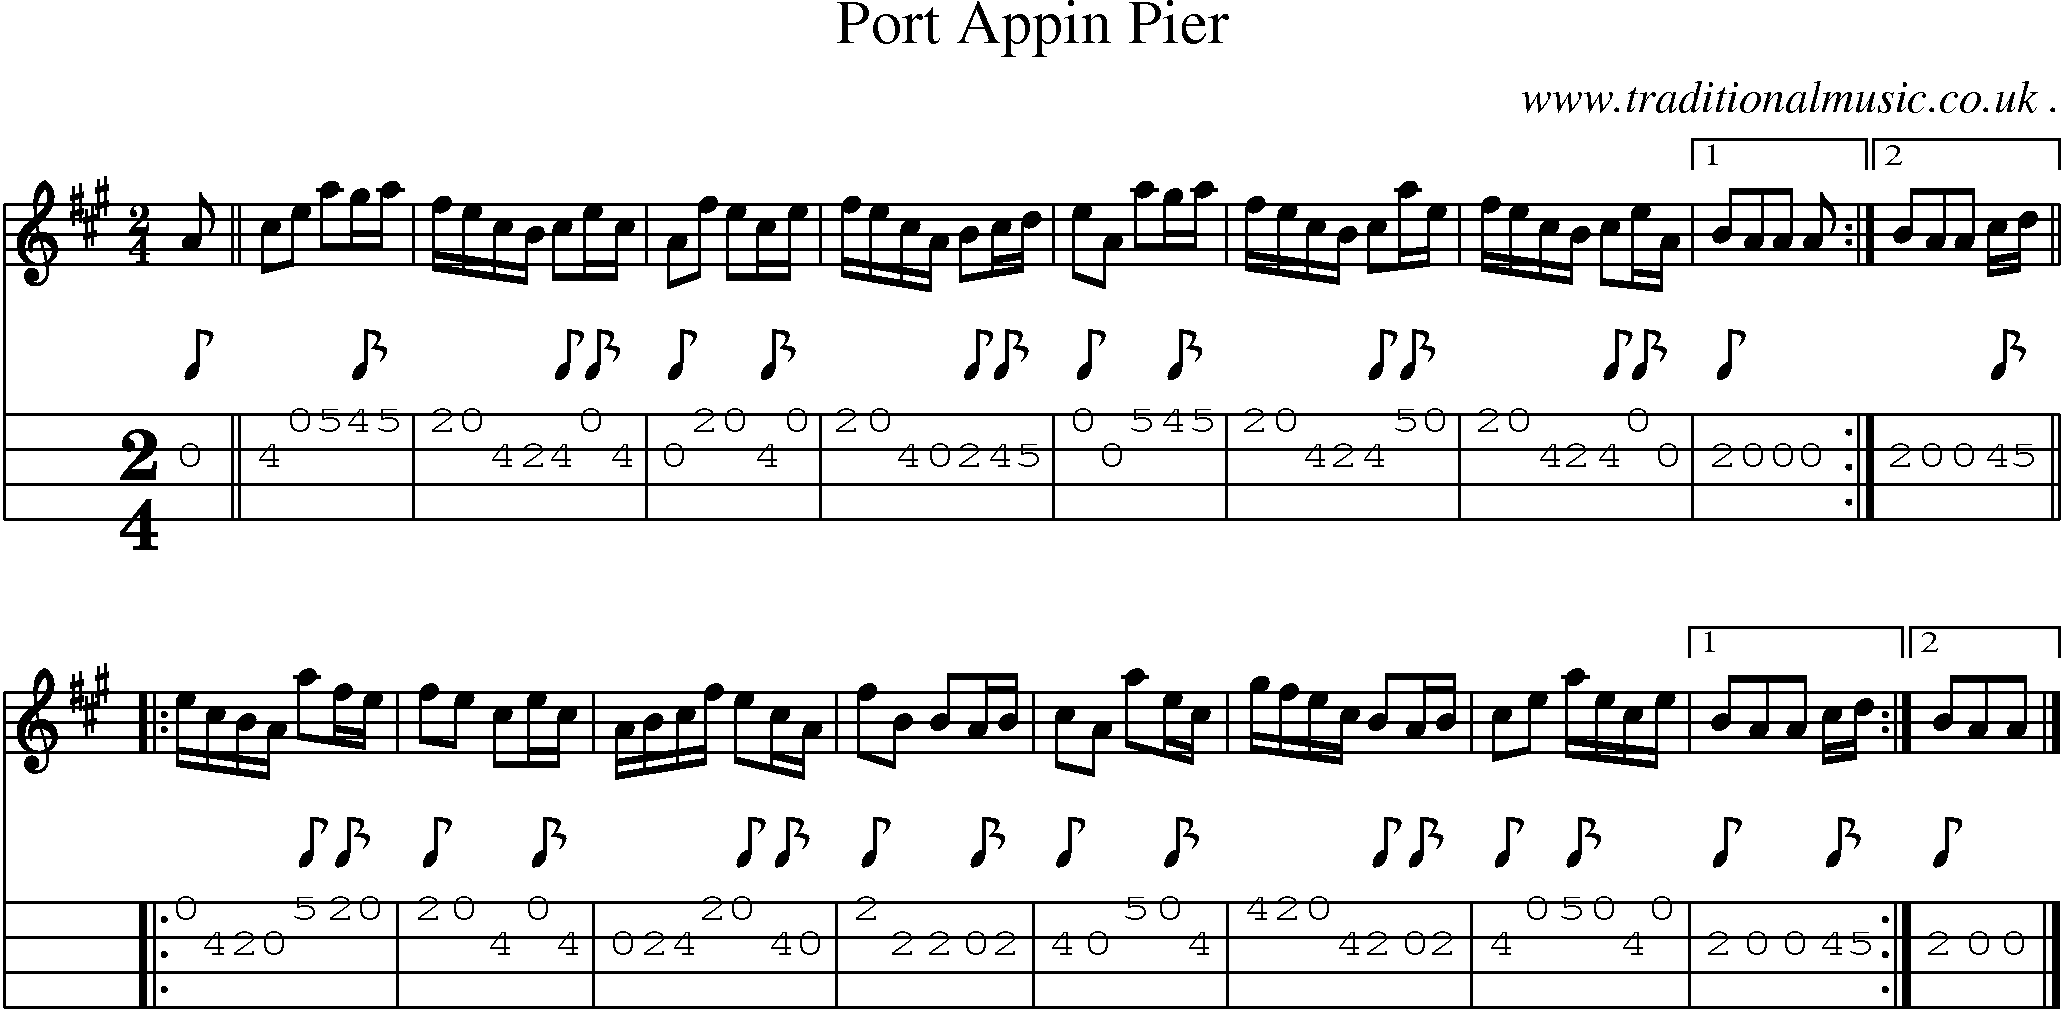 Sheet-music  score, Chords and Mandolin Tabs for Port Appin Pier